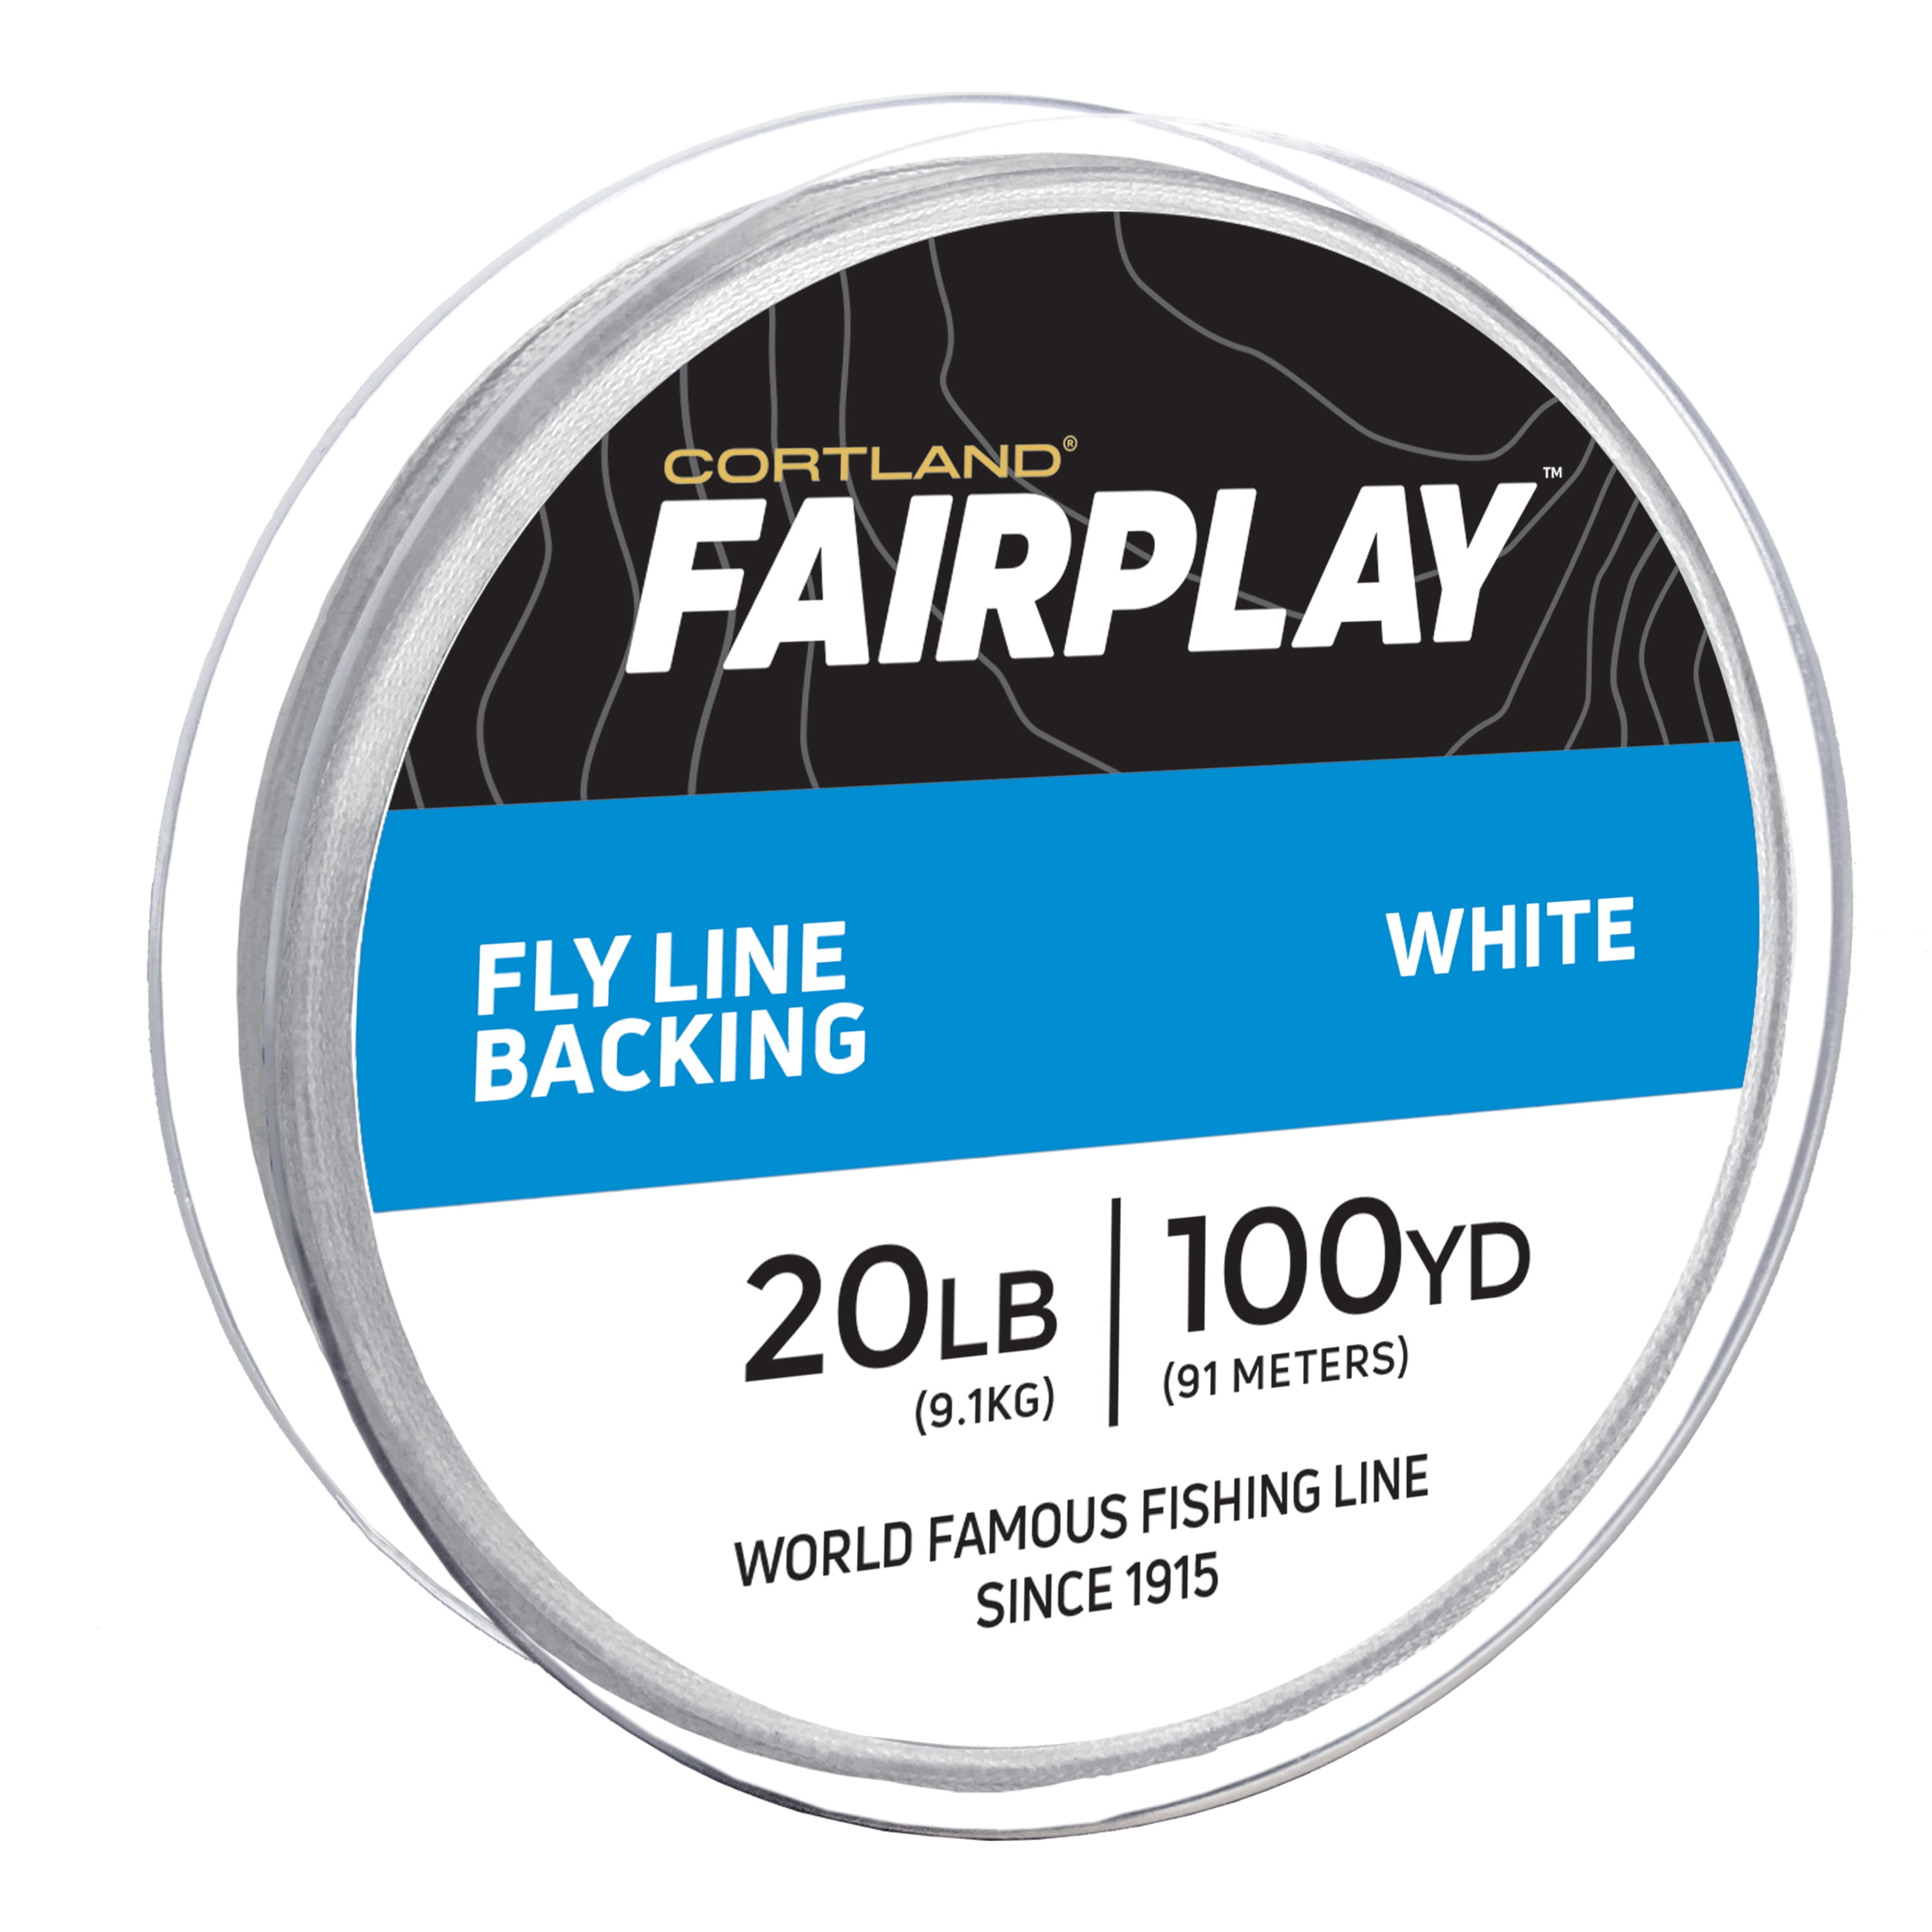 SF Braided Fly Fishing Backing Line Trout Line Backing Line 20 LB 30 LB 100m/108yds 300m/328yds